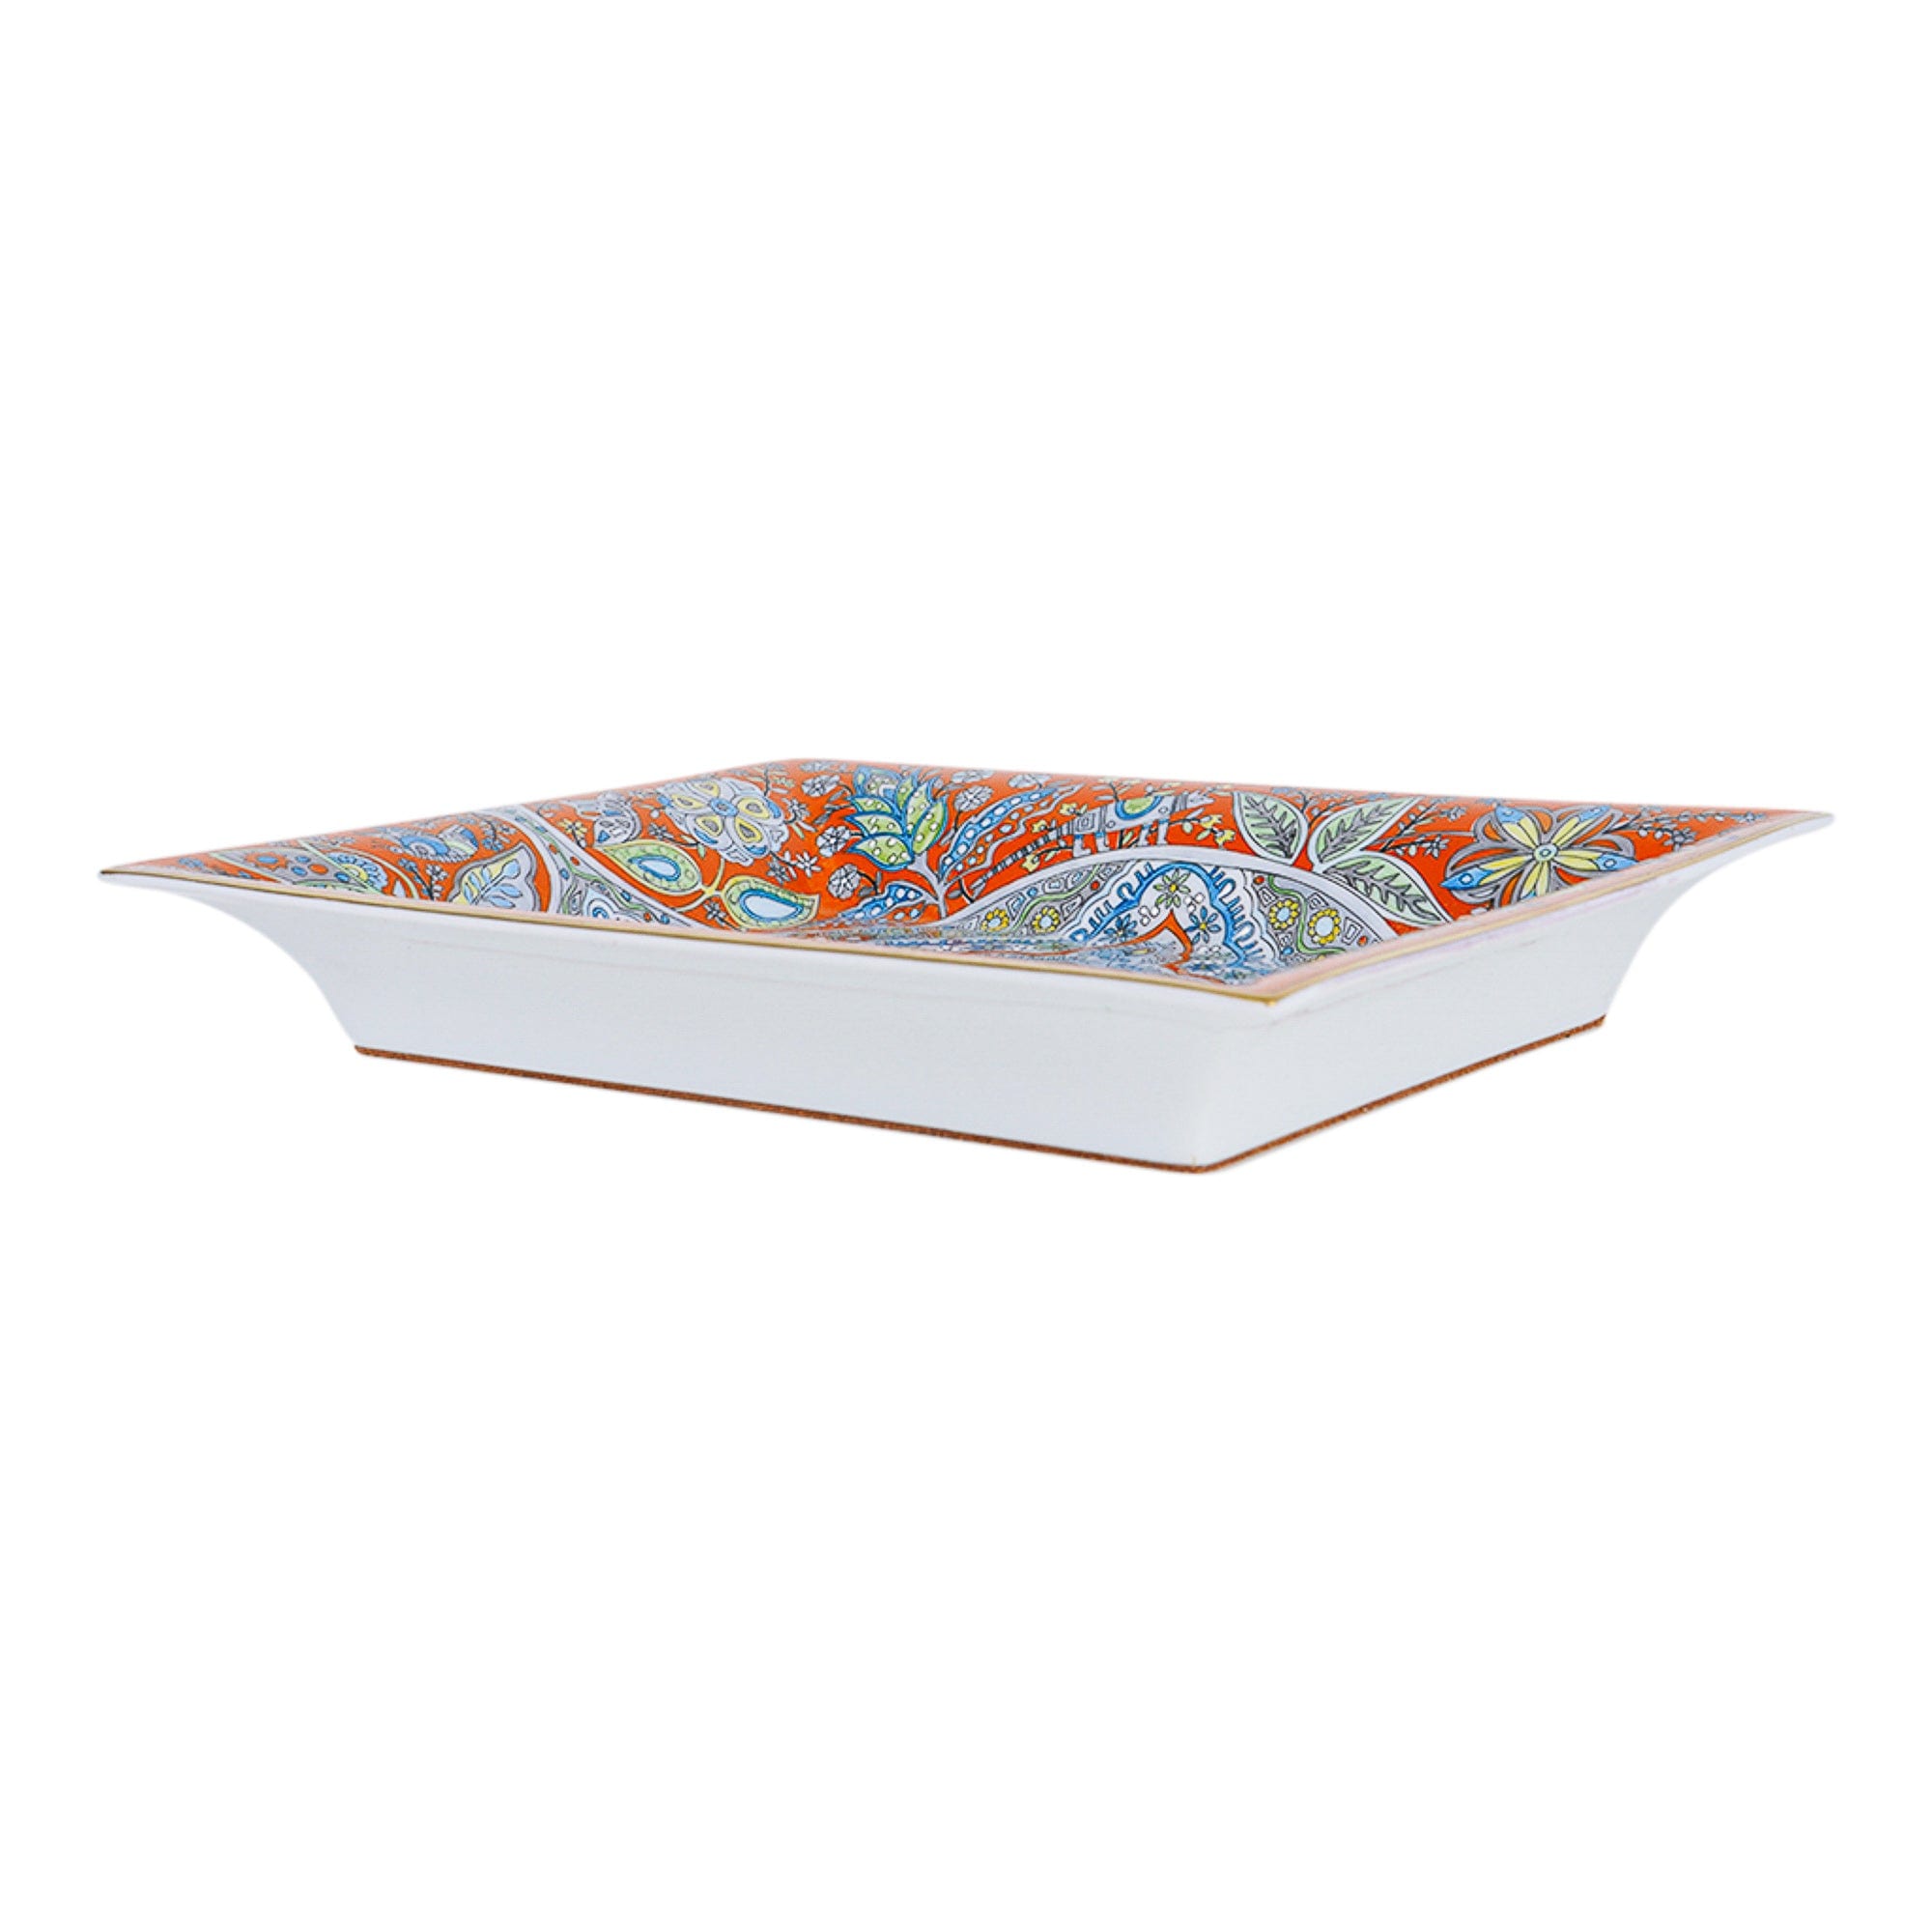 Hermes Year of India Change Tray Limoges Porcelain